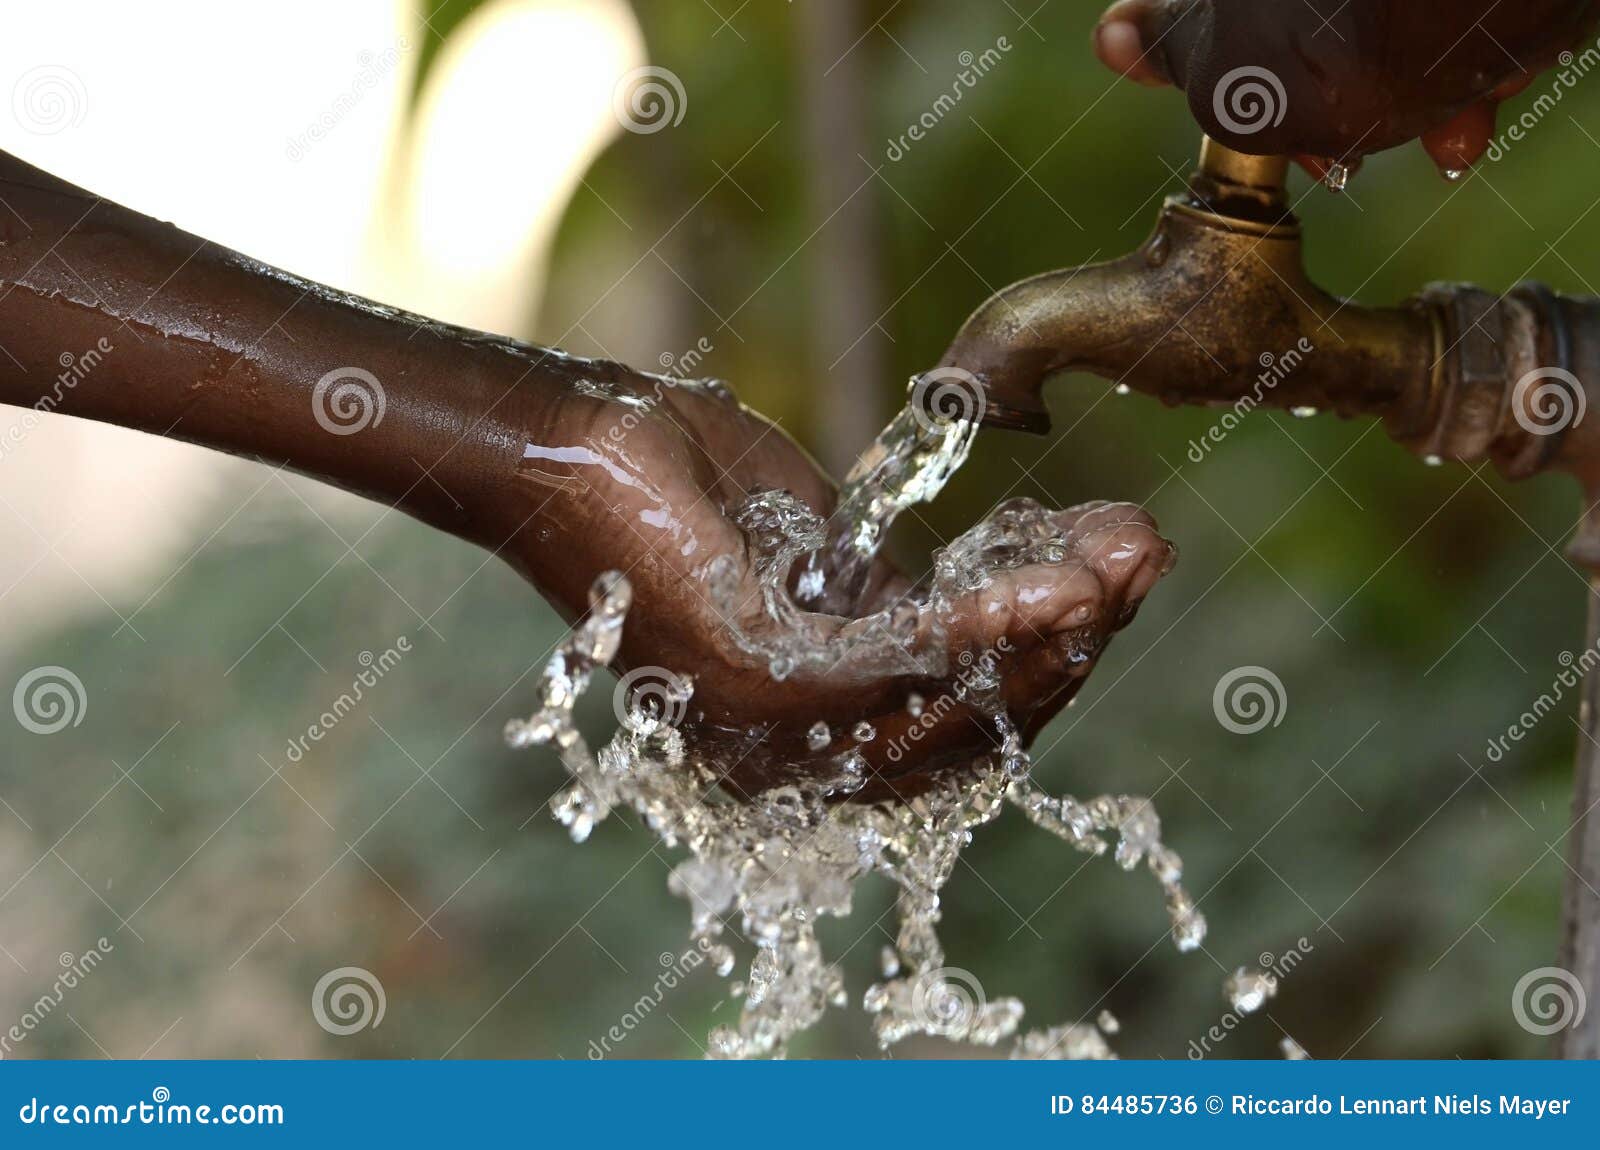 https://thumbs.dreamstime.com/z/climate-change-symbol-handful-water-scarsity-africa-symbol-gorgeous-african-black-girl-drinking-hands-cupped-drought-84485736.jpg